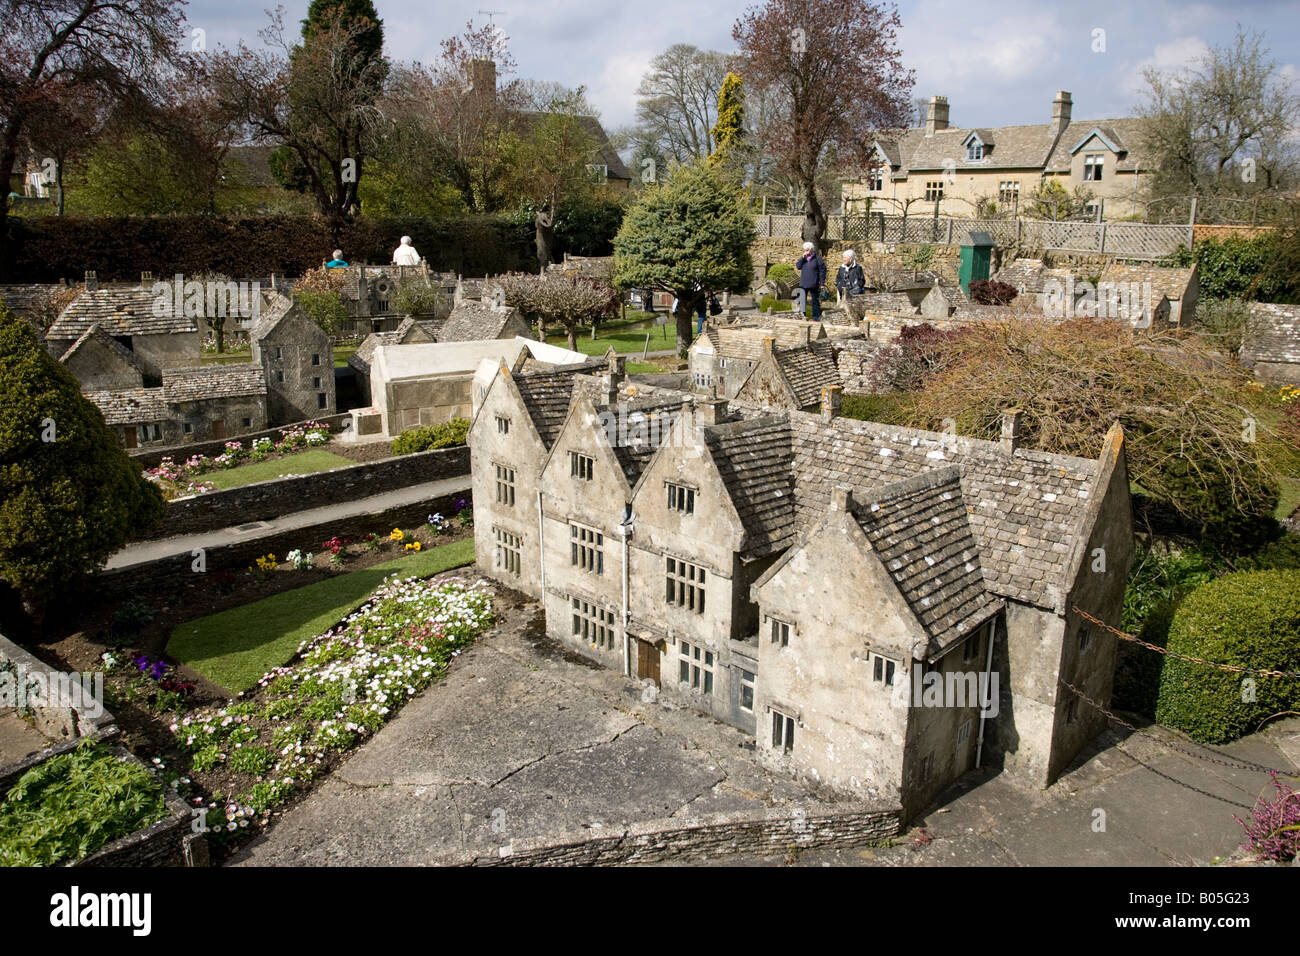 Miniature Cotswold houses model village Bourton on the Water UK Stock Photo